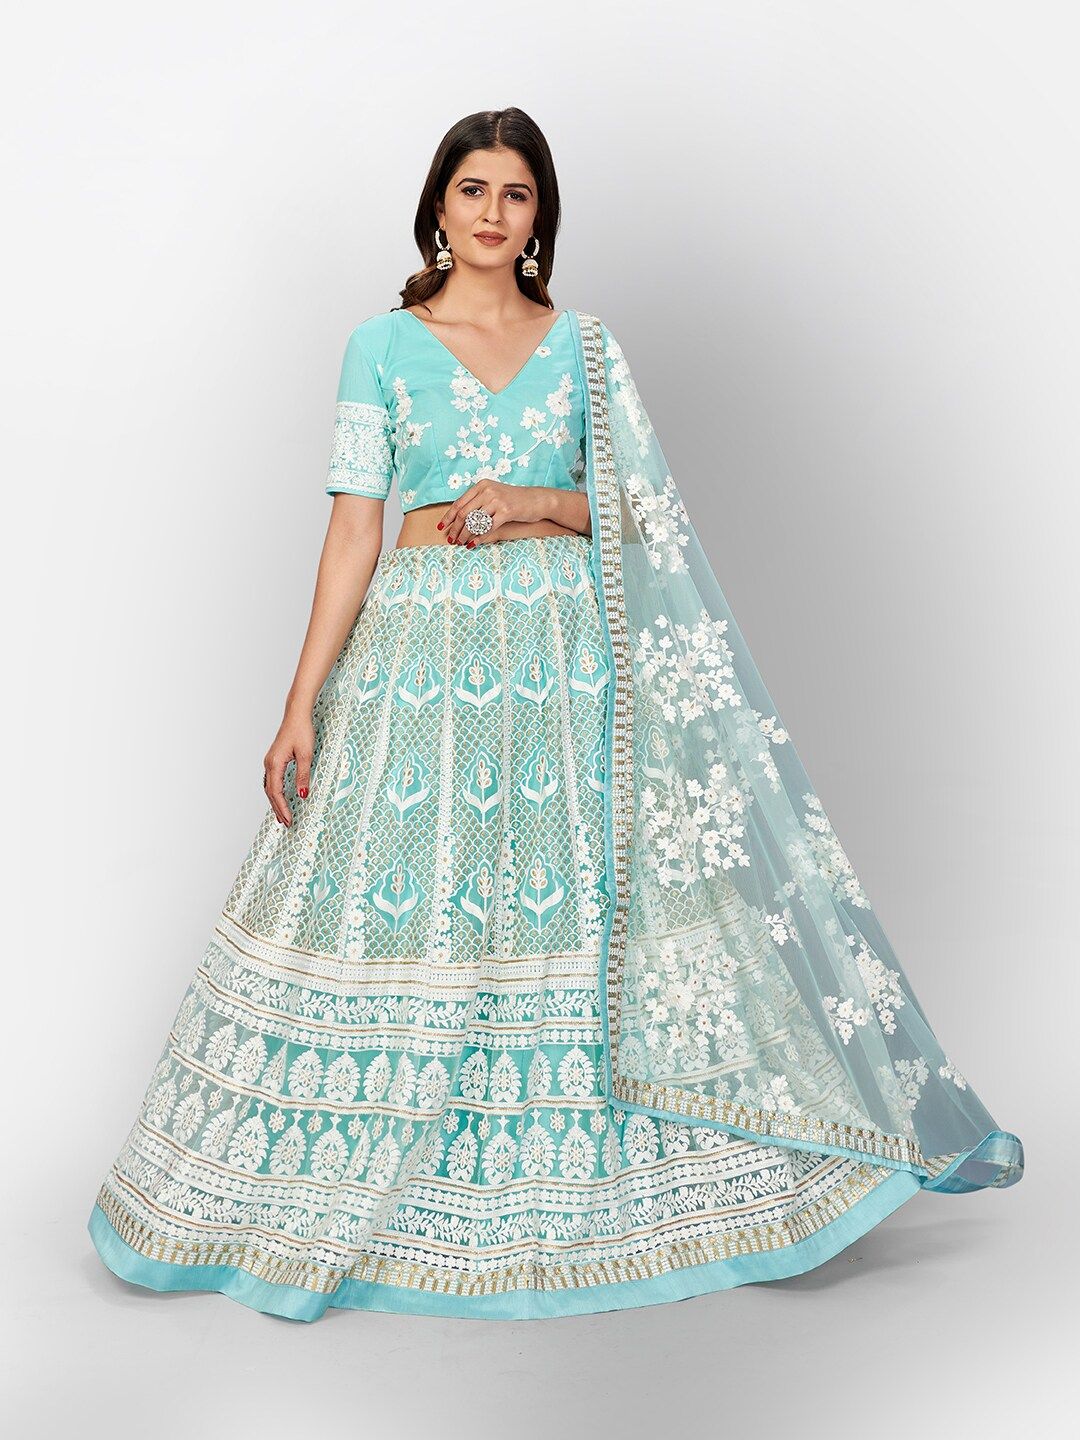 SHOPGARB Turquoise Blue & White Embroidered Thread Work Semi-Stitched Lehenga & Unstitched Blouse With Price in India